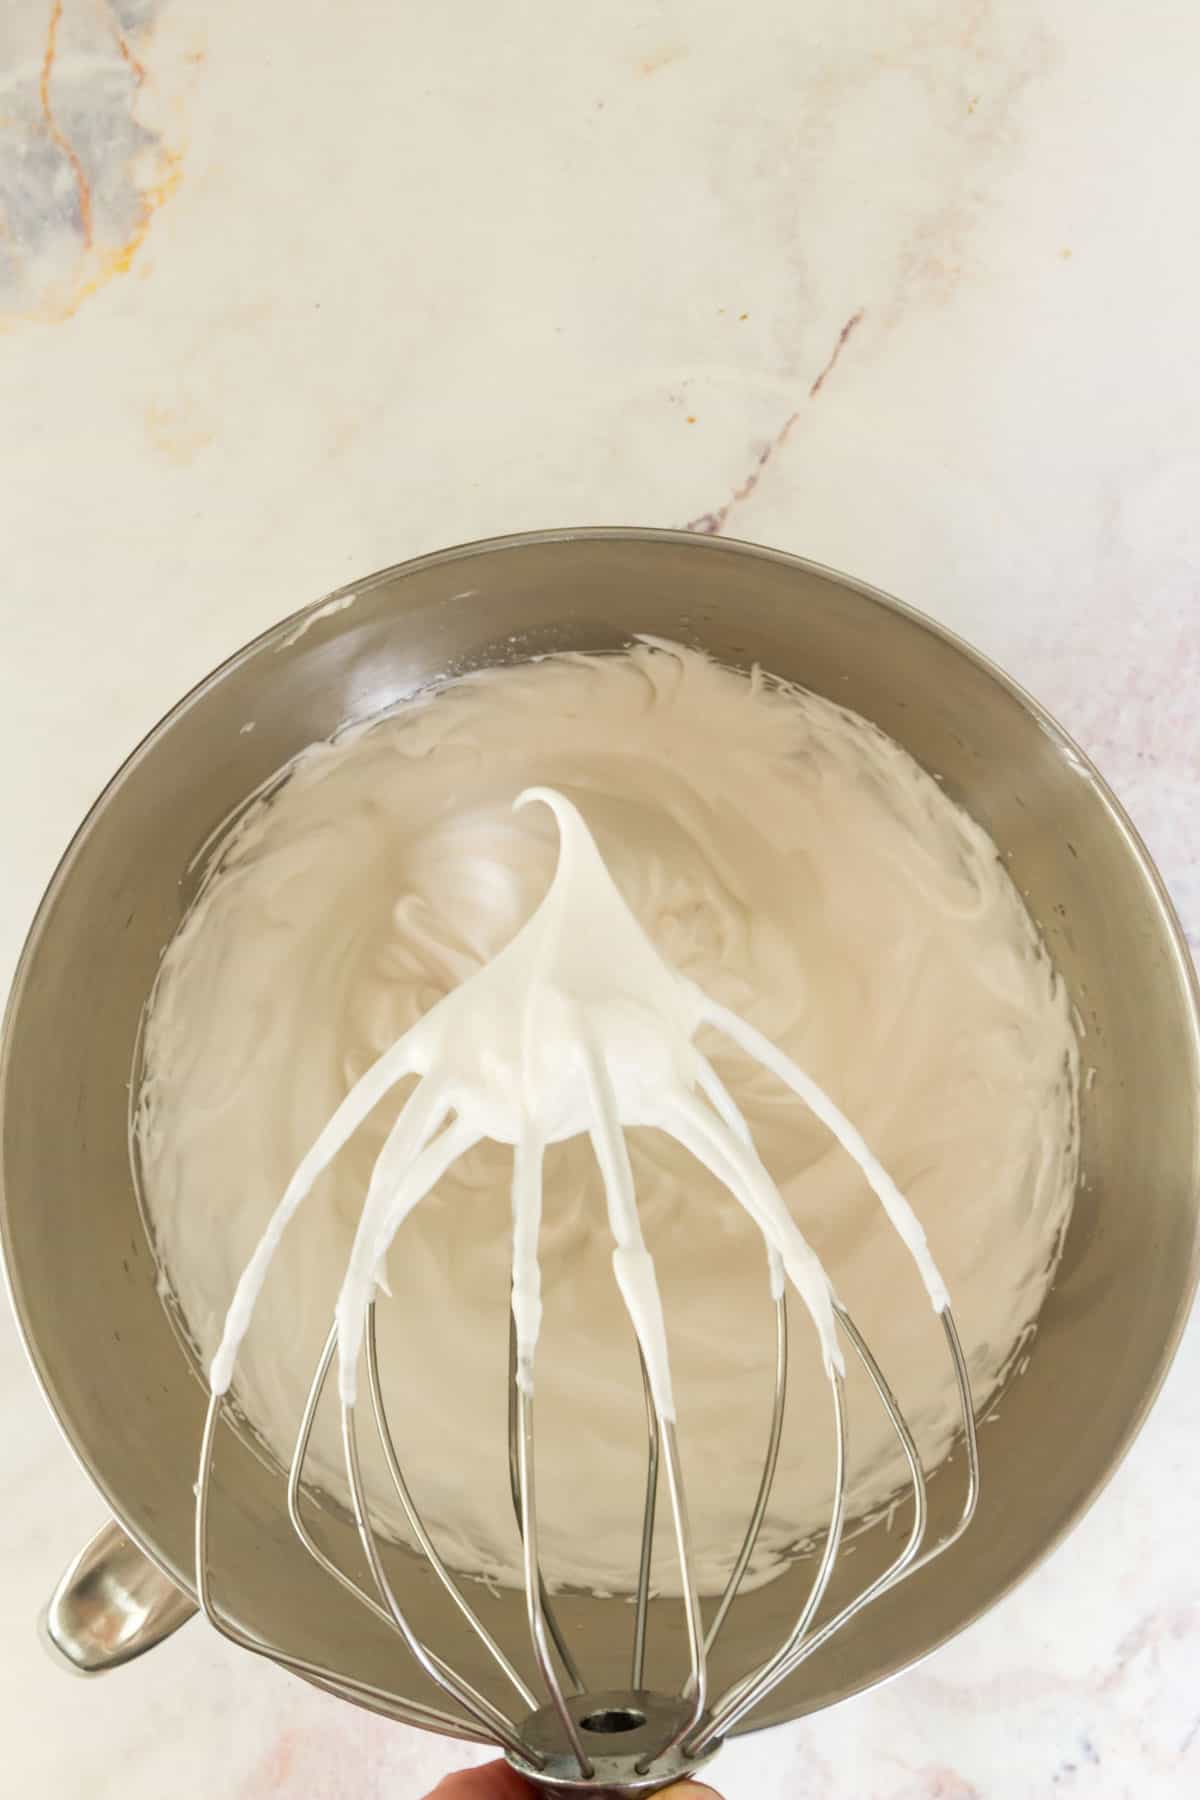 A stander mixer whisk attachment with a stiff meringue peak, with the bowl of the stand mixer in the background.